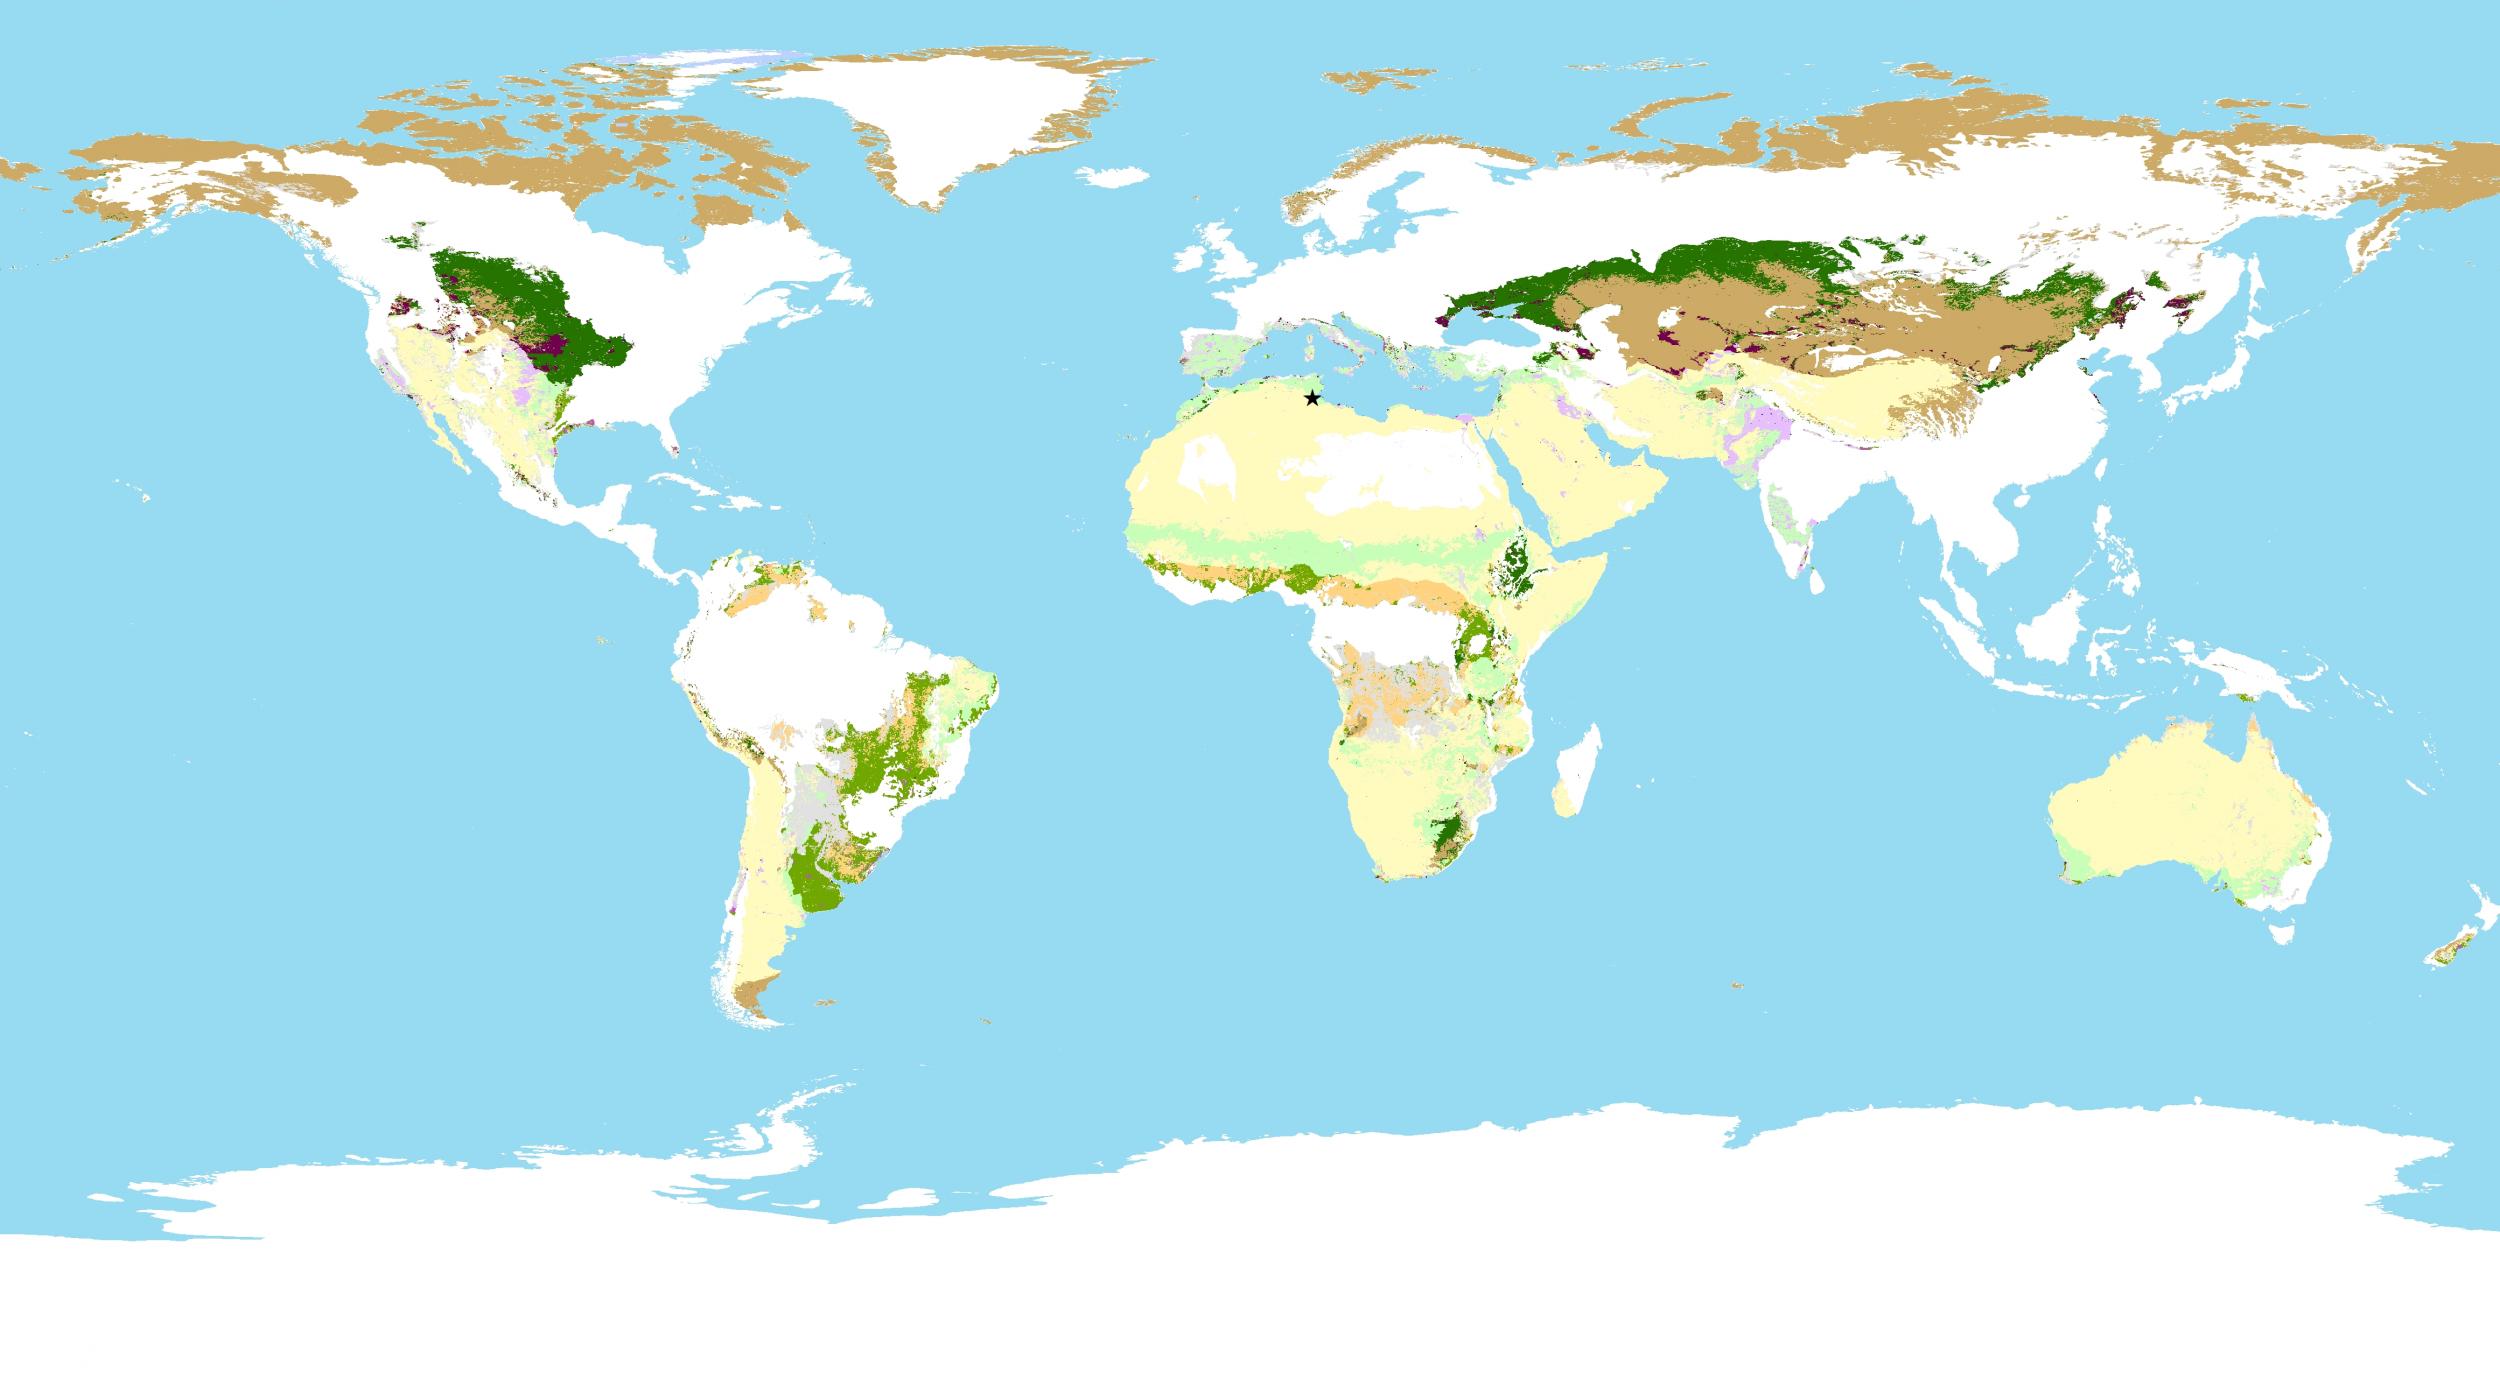 Types of ruminant production systems found in rangelands globally